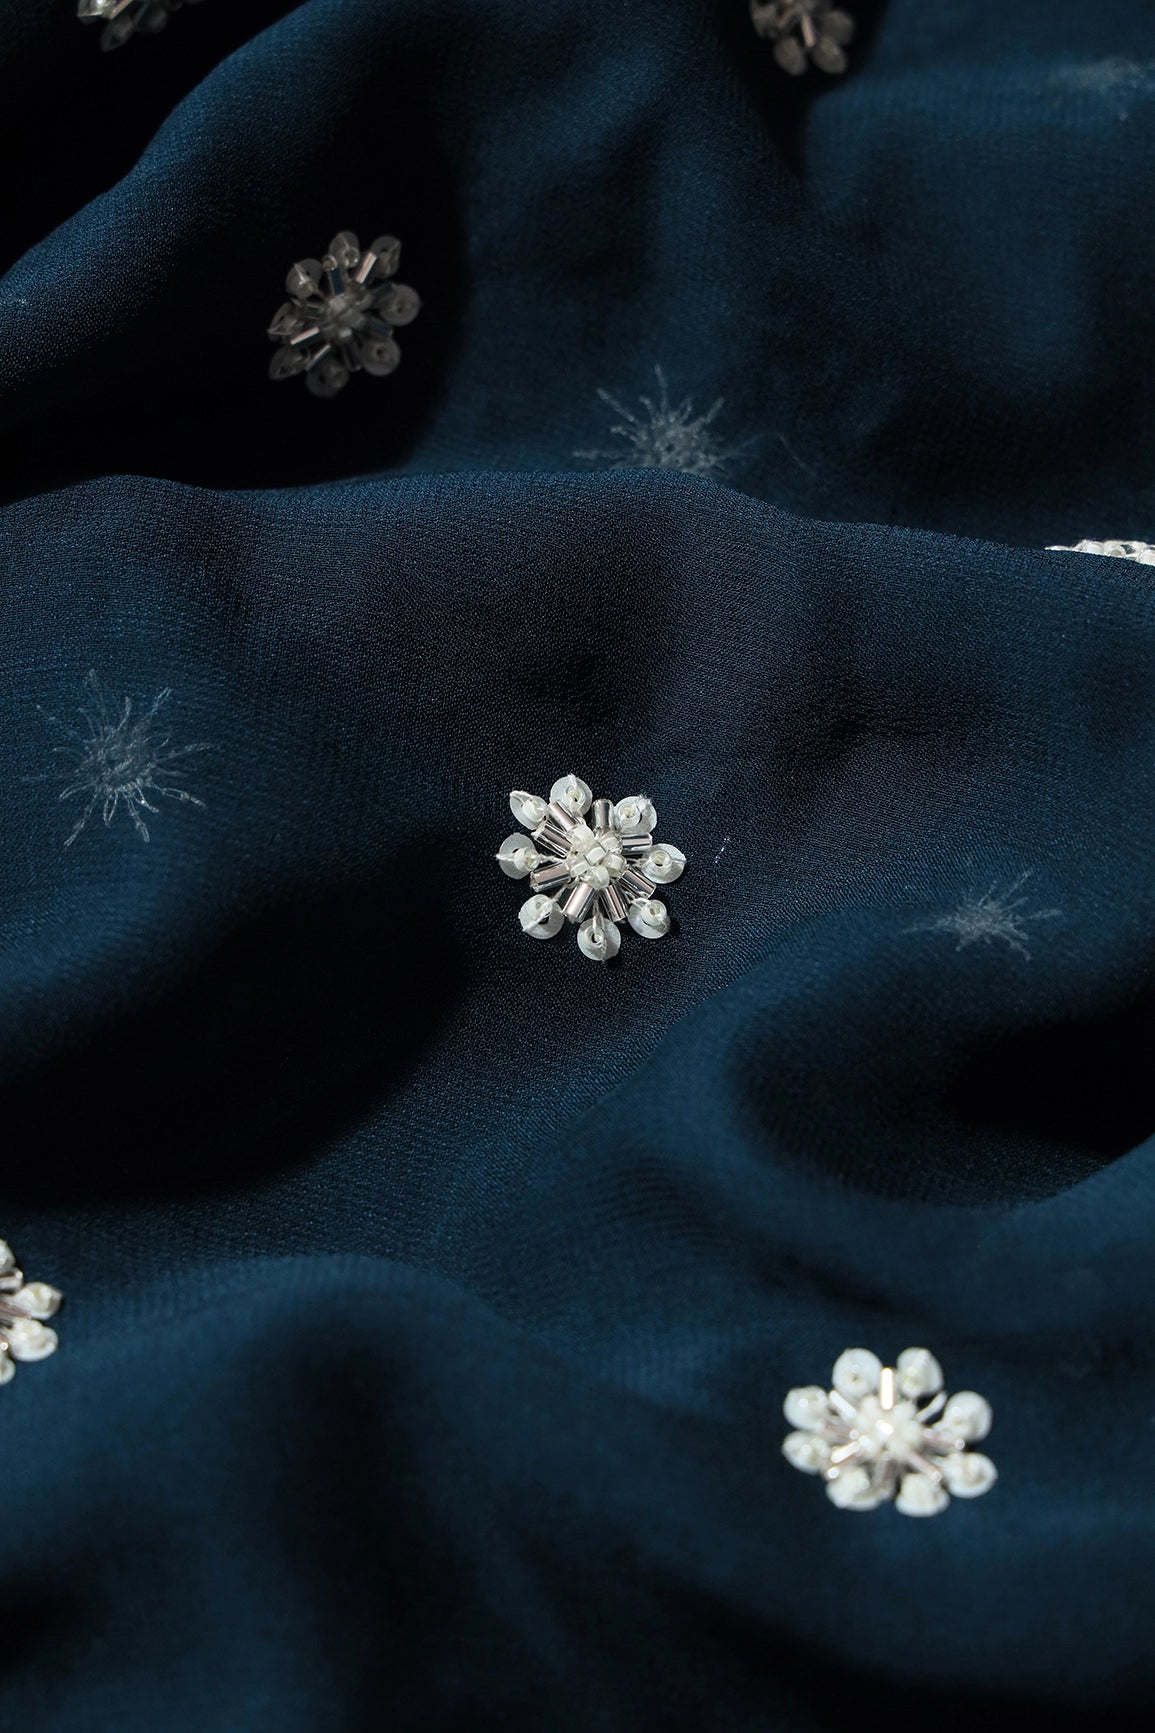 Silver Beads With Sequins Small Floral Handwork Embroidery On Prussian Blue Viscose Georgette Fabric